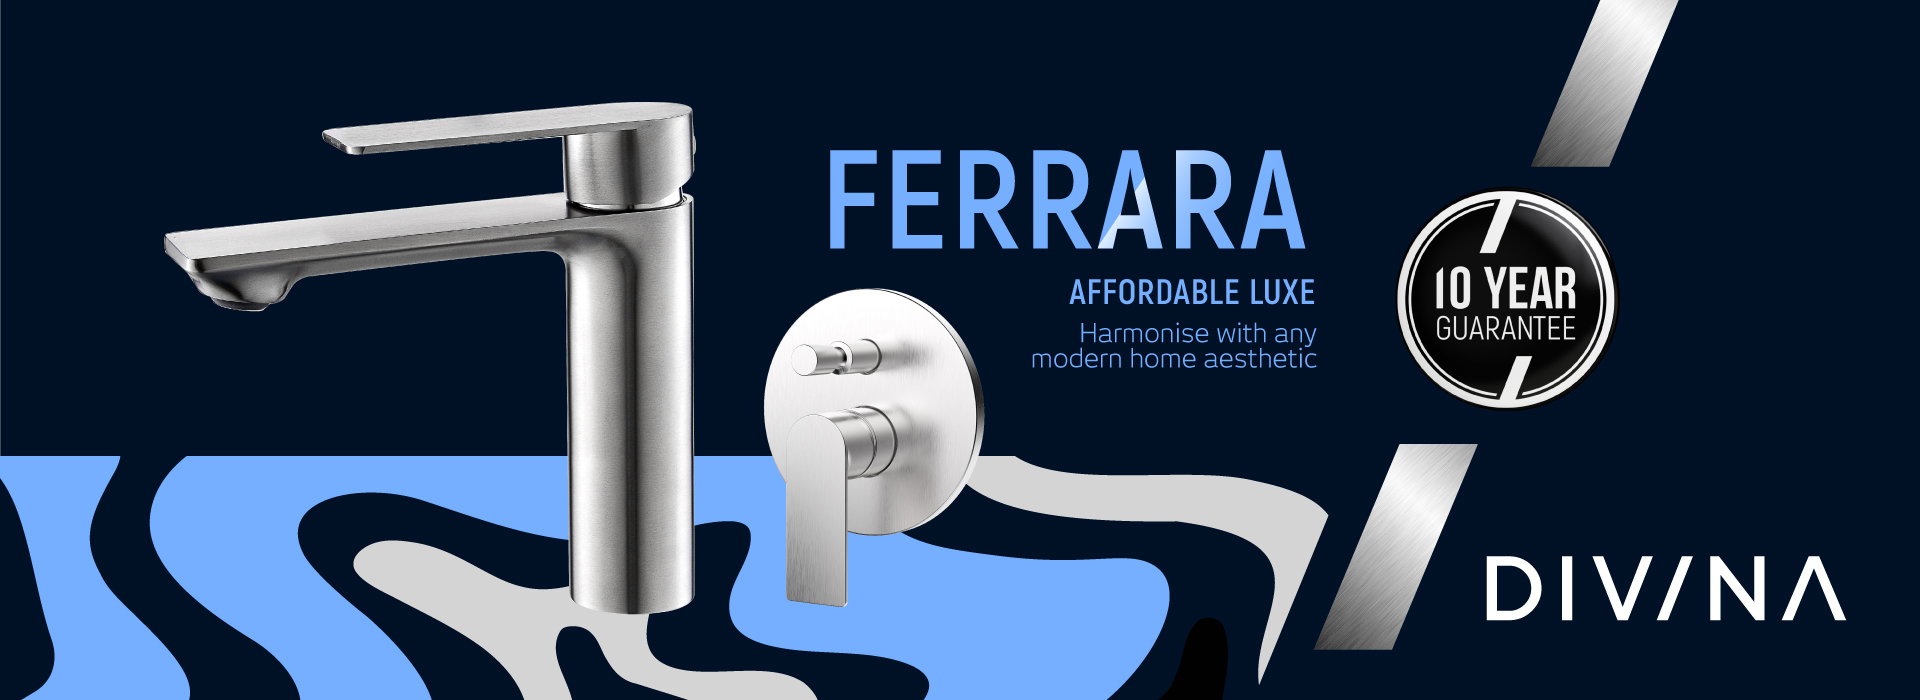 Divina Ferrara Stainless Steel Bathroom Tap Collection